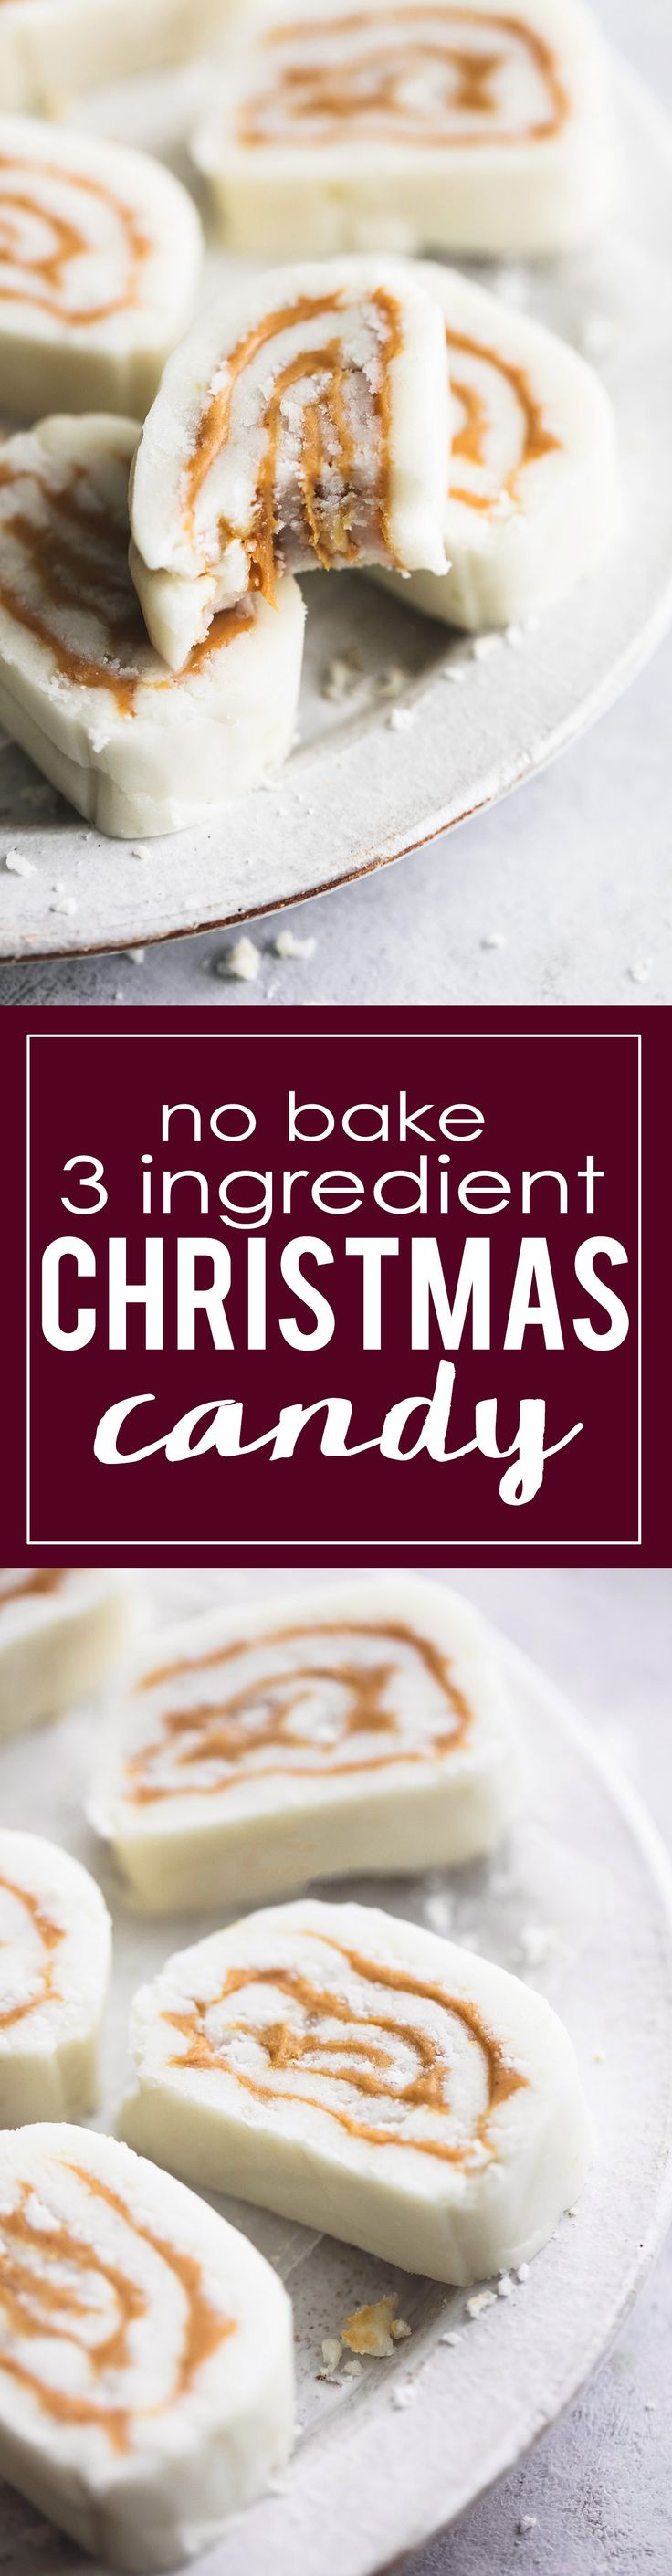 No Bake Christmas Candy
 Best 25 Christmas candy ideas on Pinterest